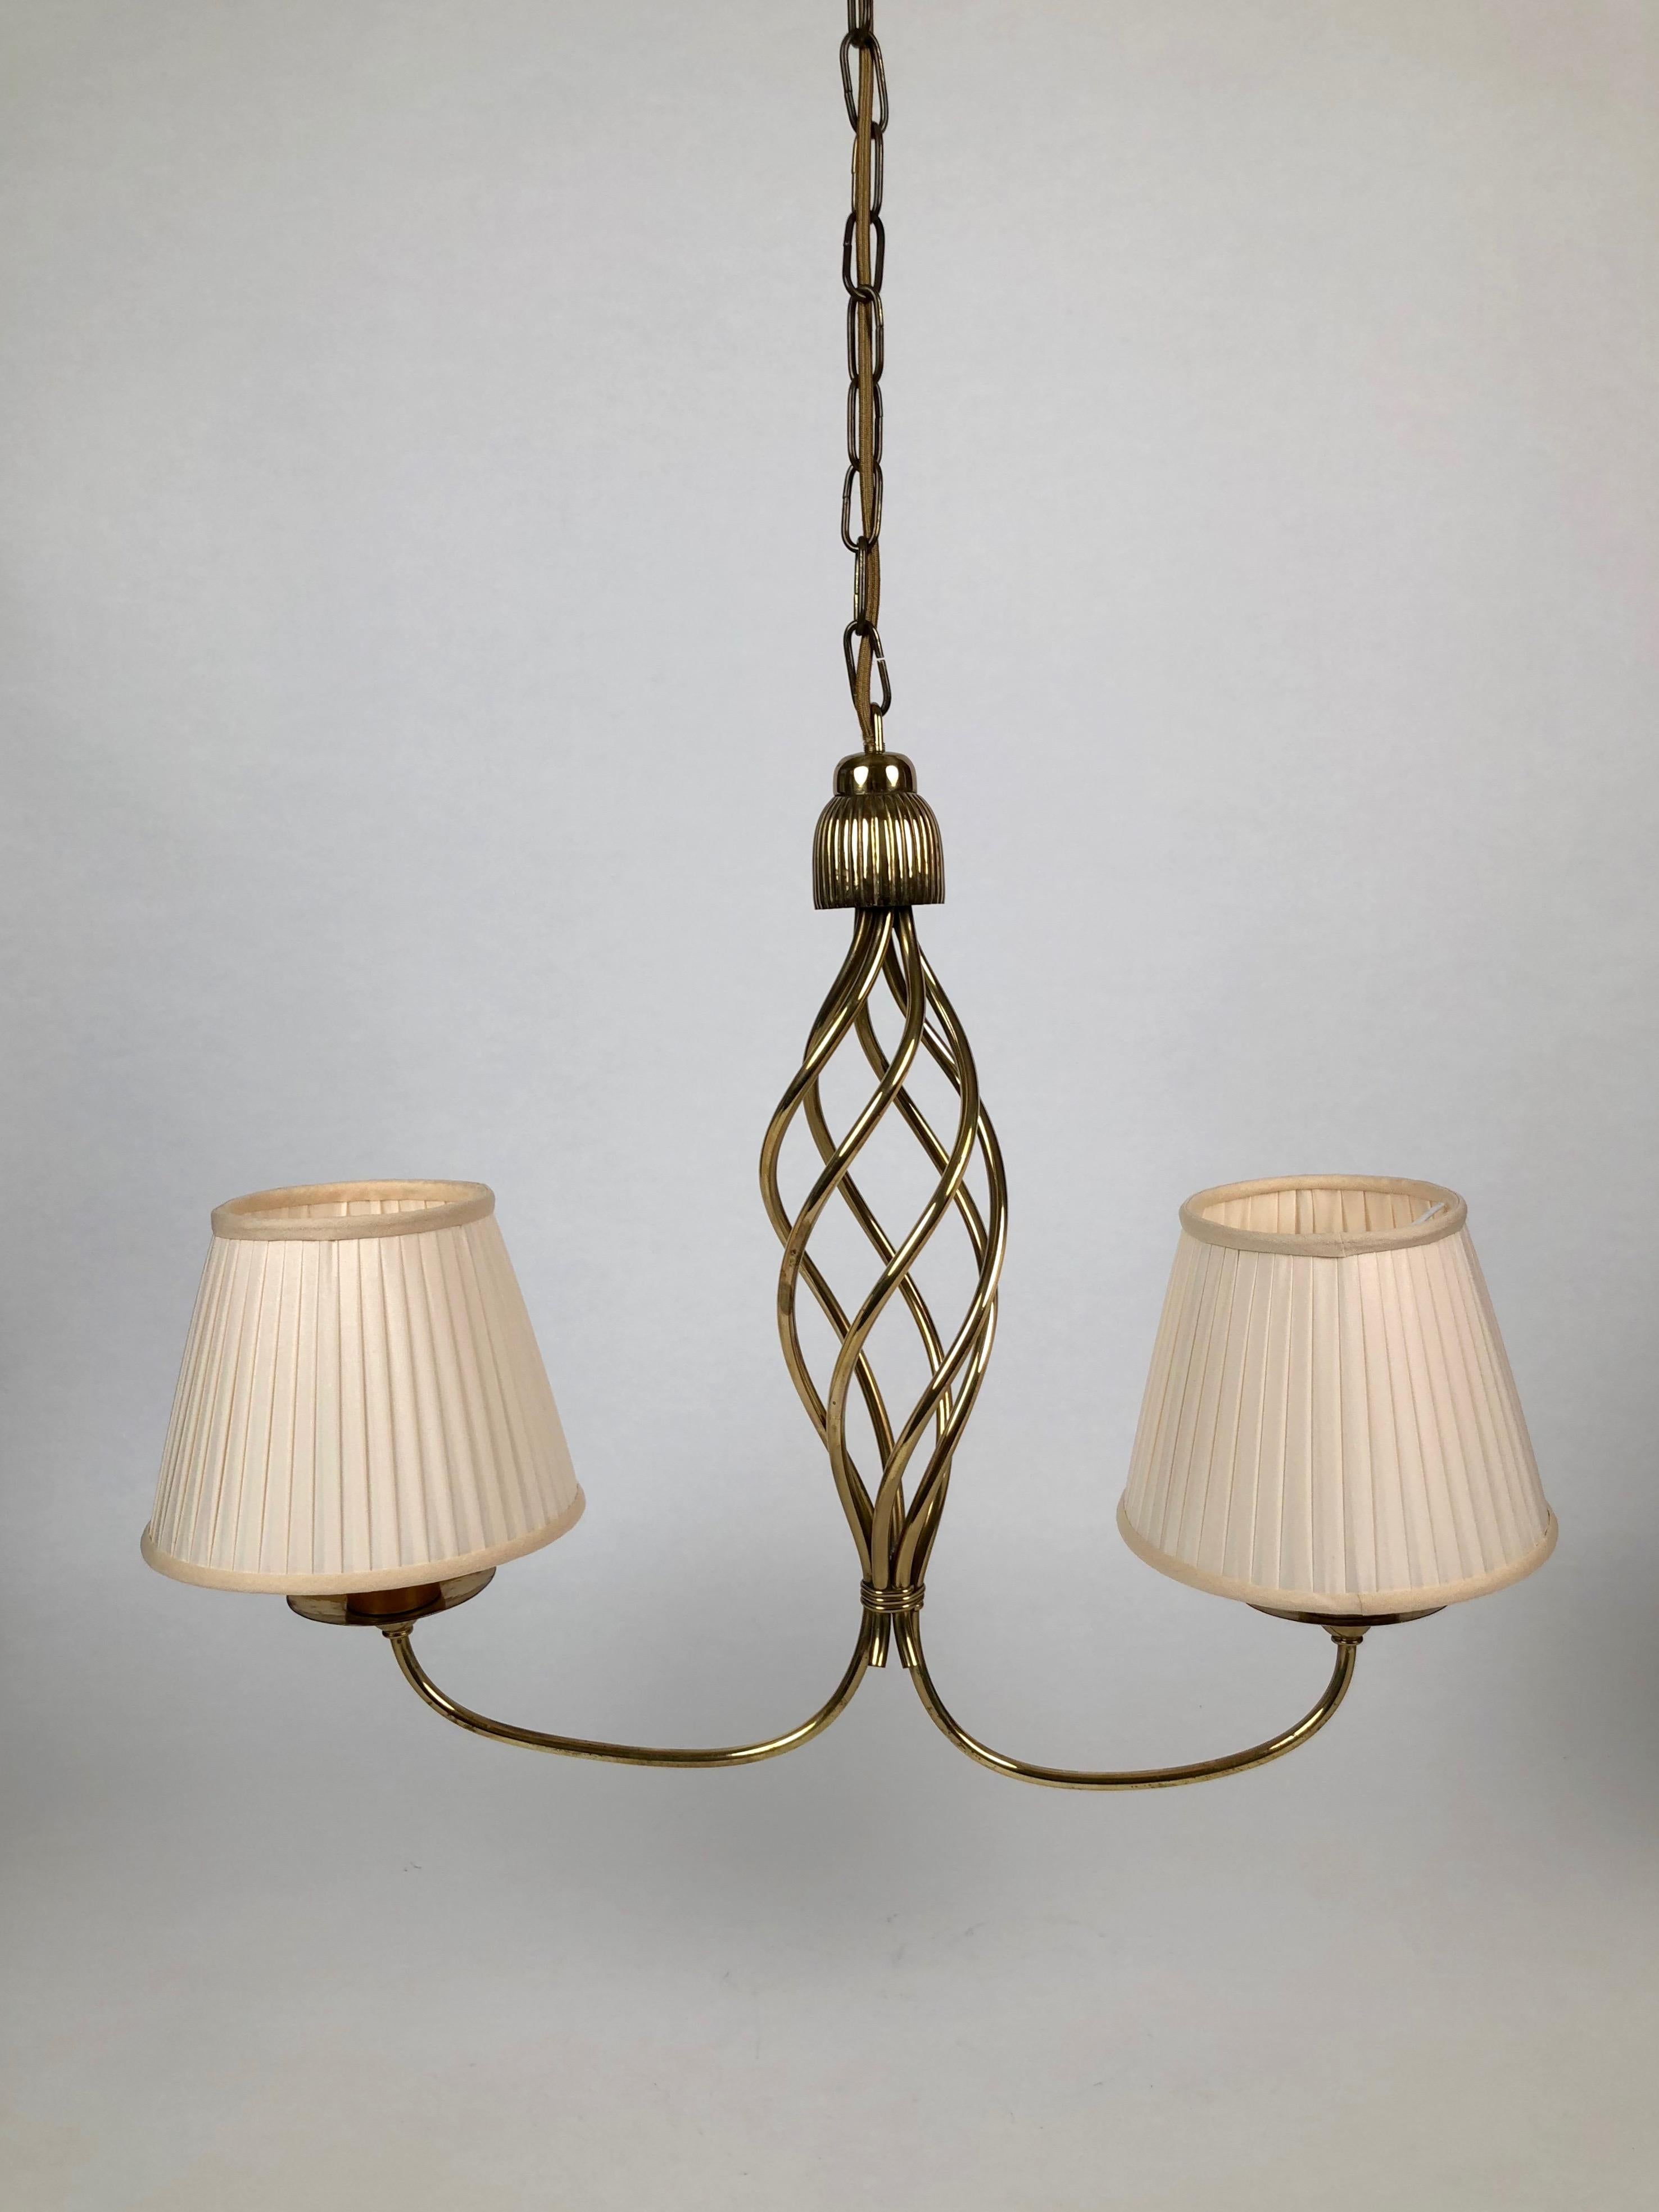 Beautiful handmade lamp from 1930s in brass. The braid is hand fabricated and the details are hand-hammered in brass.
The chandelier is asymmetrical in design and its completion represents Fine craftsmanship.
The shades are new in cream silk.